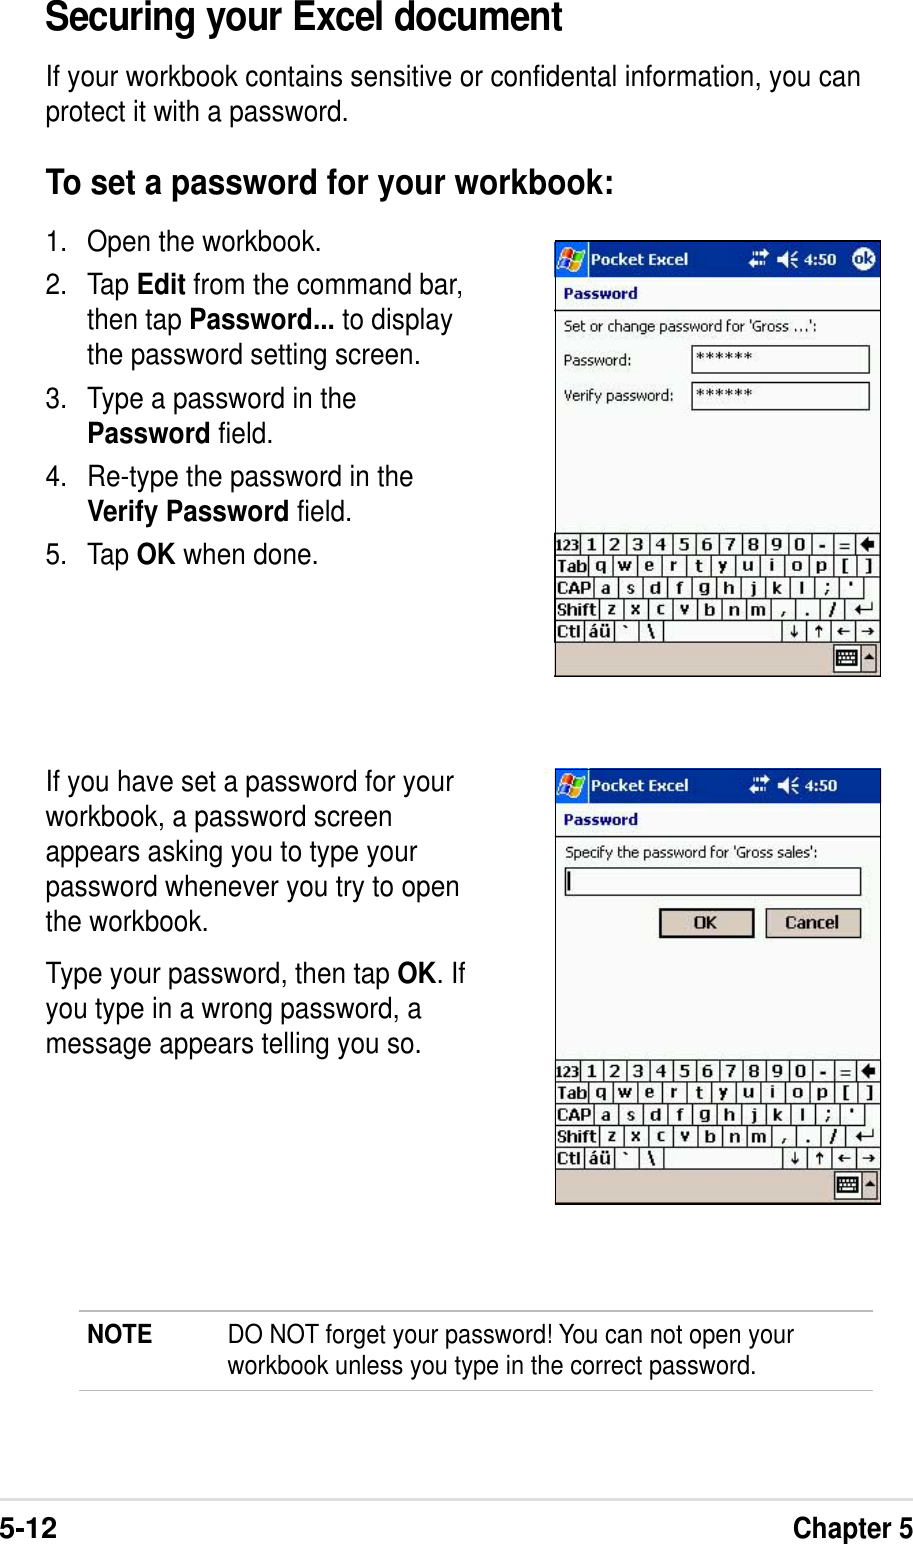 5-12Chapter 5Securing your Excel documentIf your workbook contains sensitive or confidental information, you canprotect it with a password.To set a password for your workbook:1. Open the workbook.2. Tap Edit from the command bar,then tap Password... to displaythe password setting screen.3. Type a password in thePassword field.4. Re-type the password in theVerify Password field.5. Tap OK when done.If you have set a password for yourworkbook, a password screenappears asking you to type yourpassword whenever you try to openthe workbook.Type your password, then tap OK. Ifyou type in a wrong password, amessage appears telling you so.NOTE DO NOT forget your password! You can not open yourworkbook unless you type in the correct password.